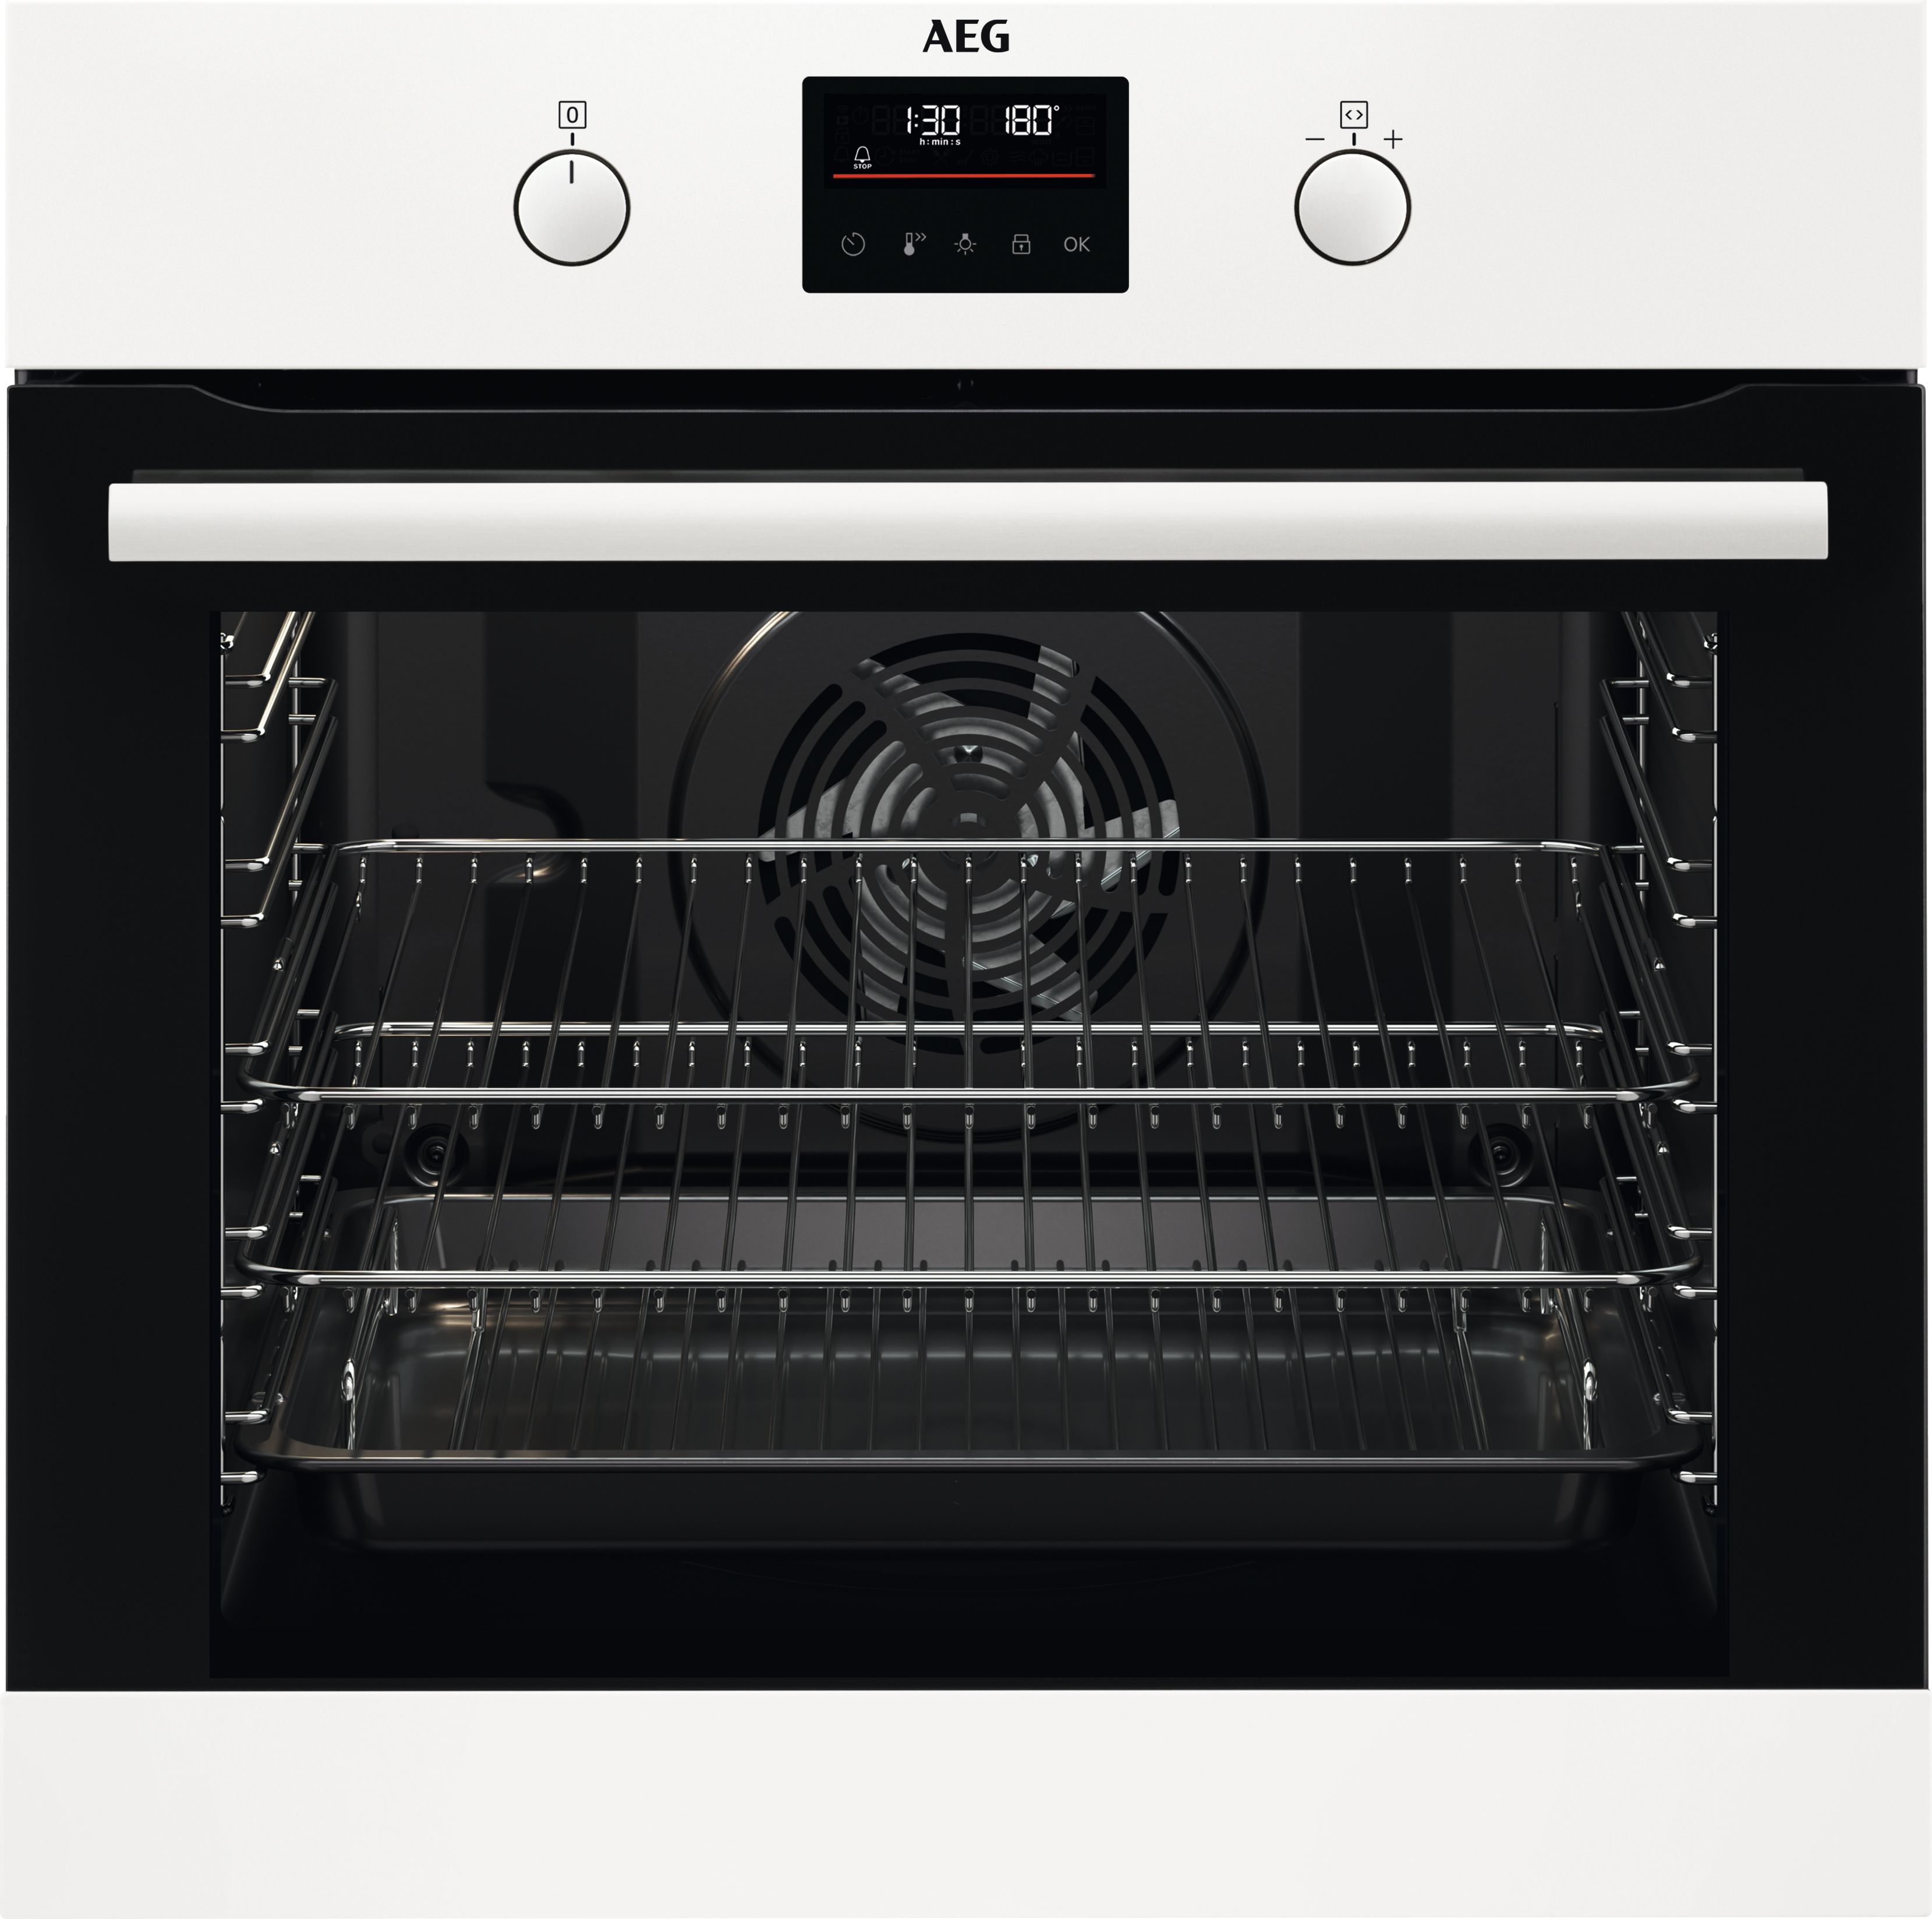 AEG BEB335061W Built In Electric Single Oven - White - A+ Rated, White